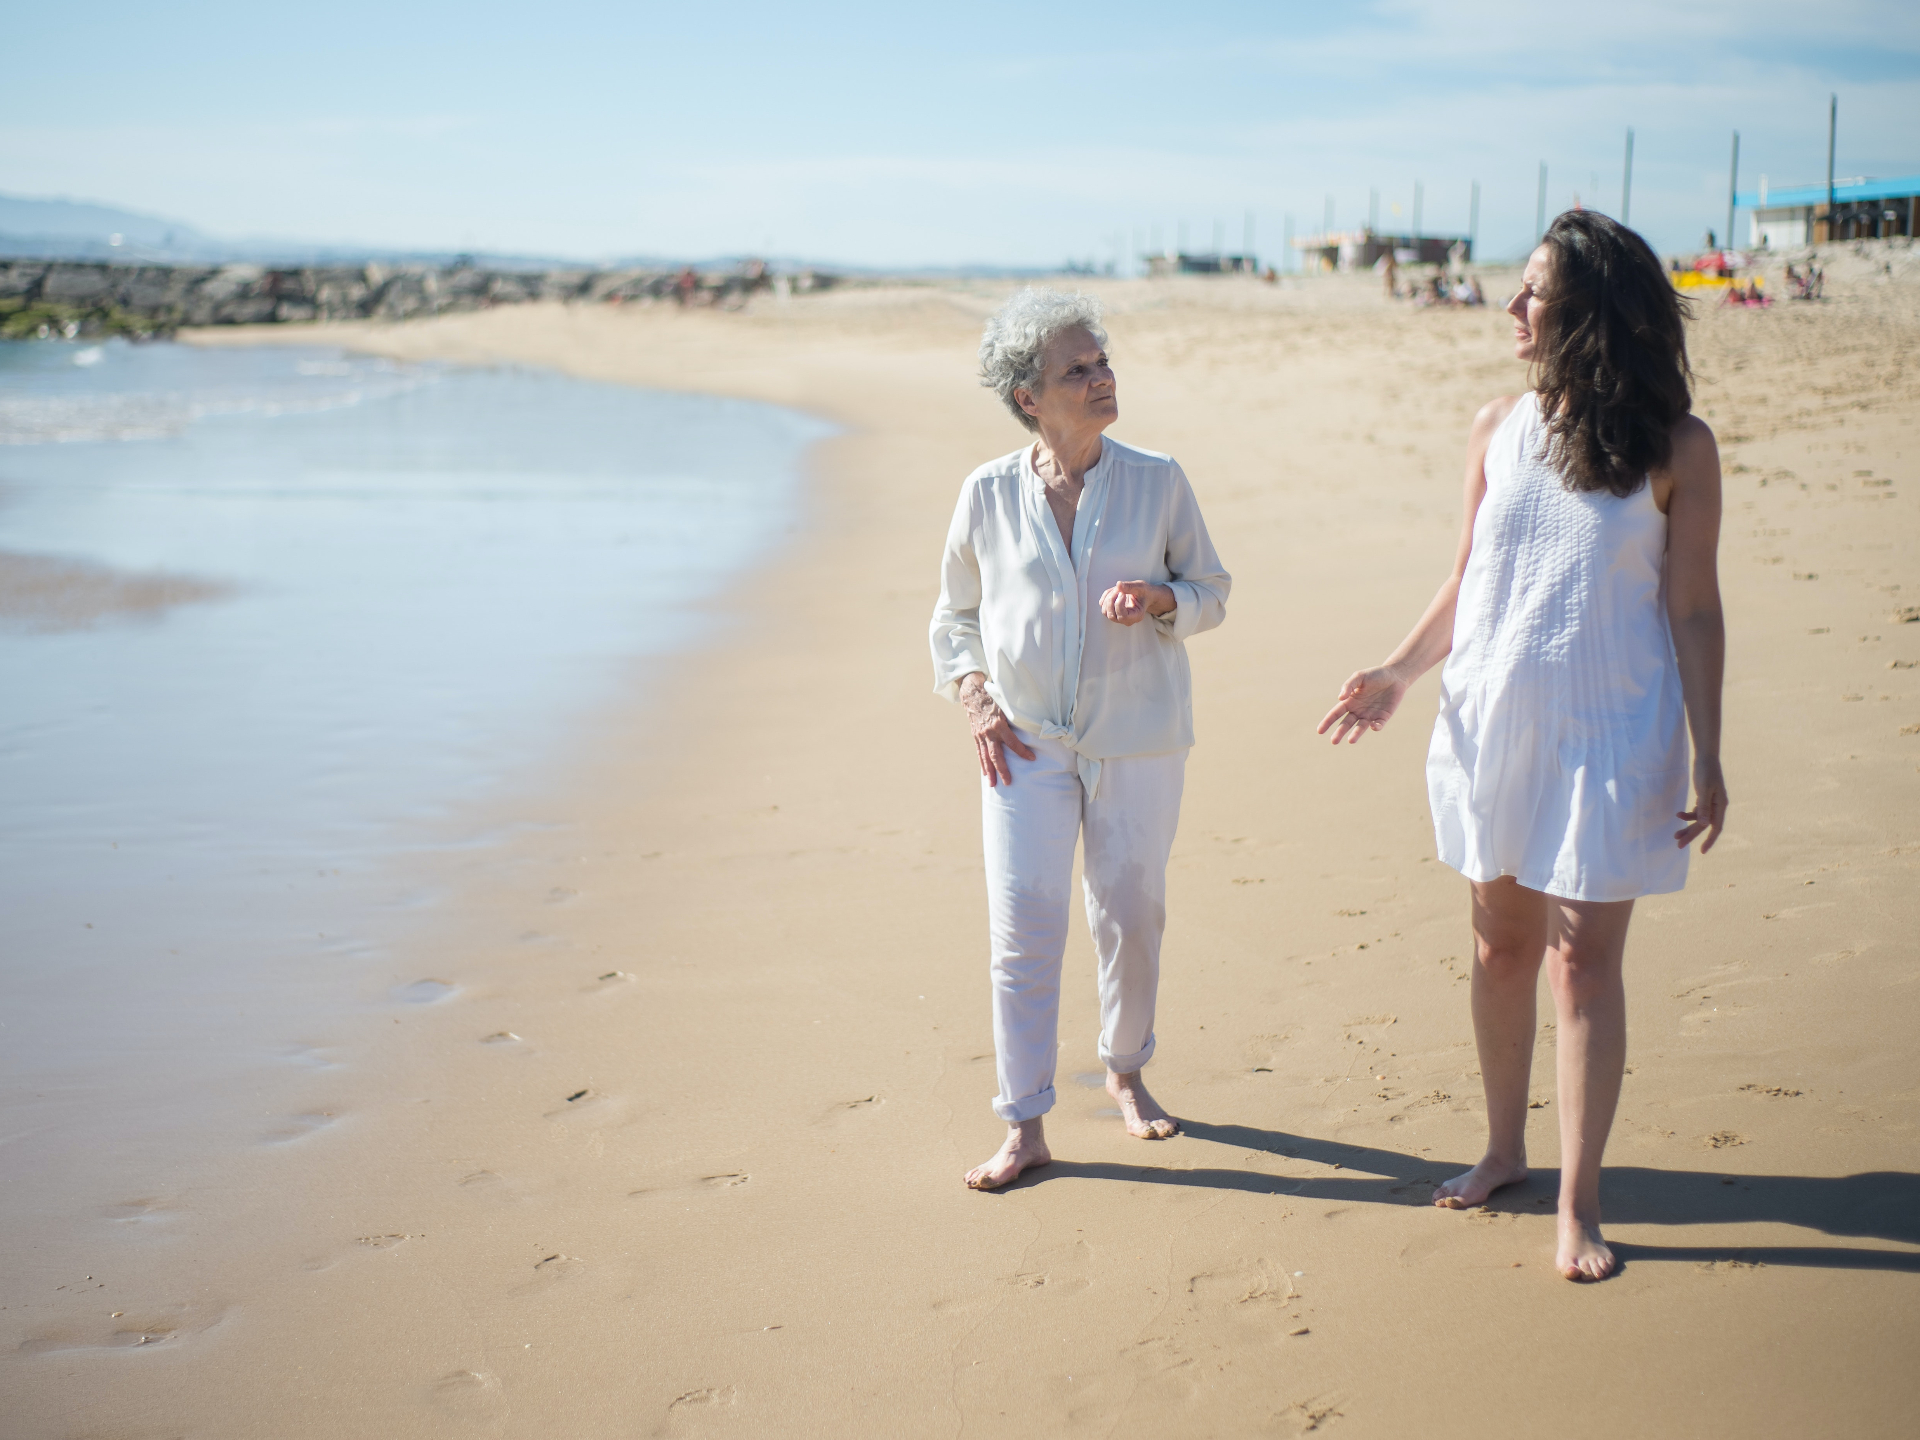 Image of an older and younger woman walking and talking on a sandy beach near the ocean. With the help of adult neuropsychological testing in Saint Petersburg, FL you can work through your memory issues and find your cognitive strengths.